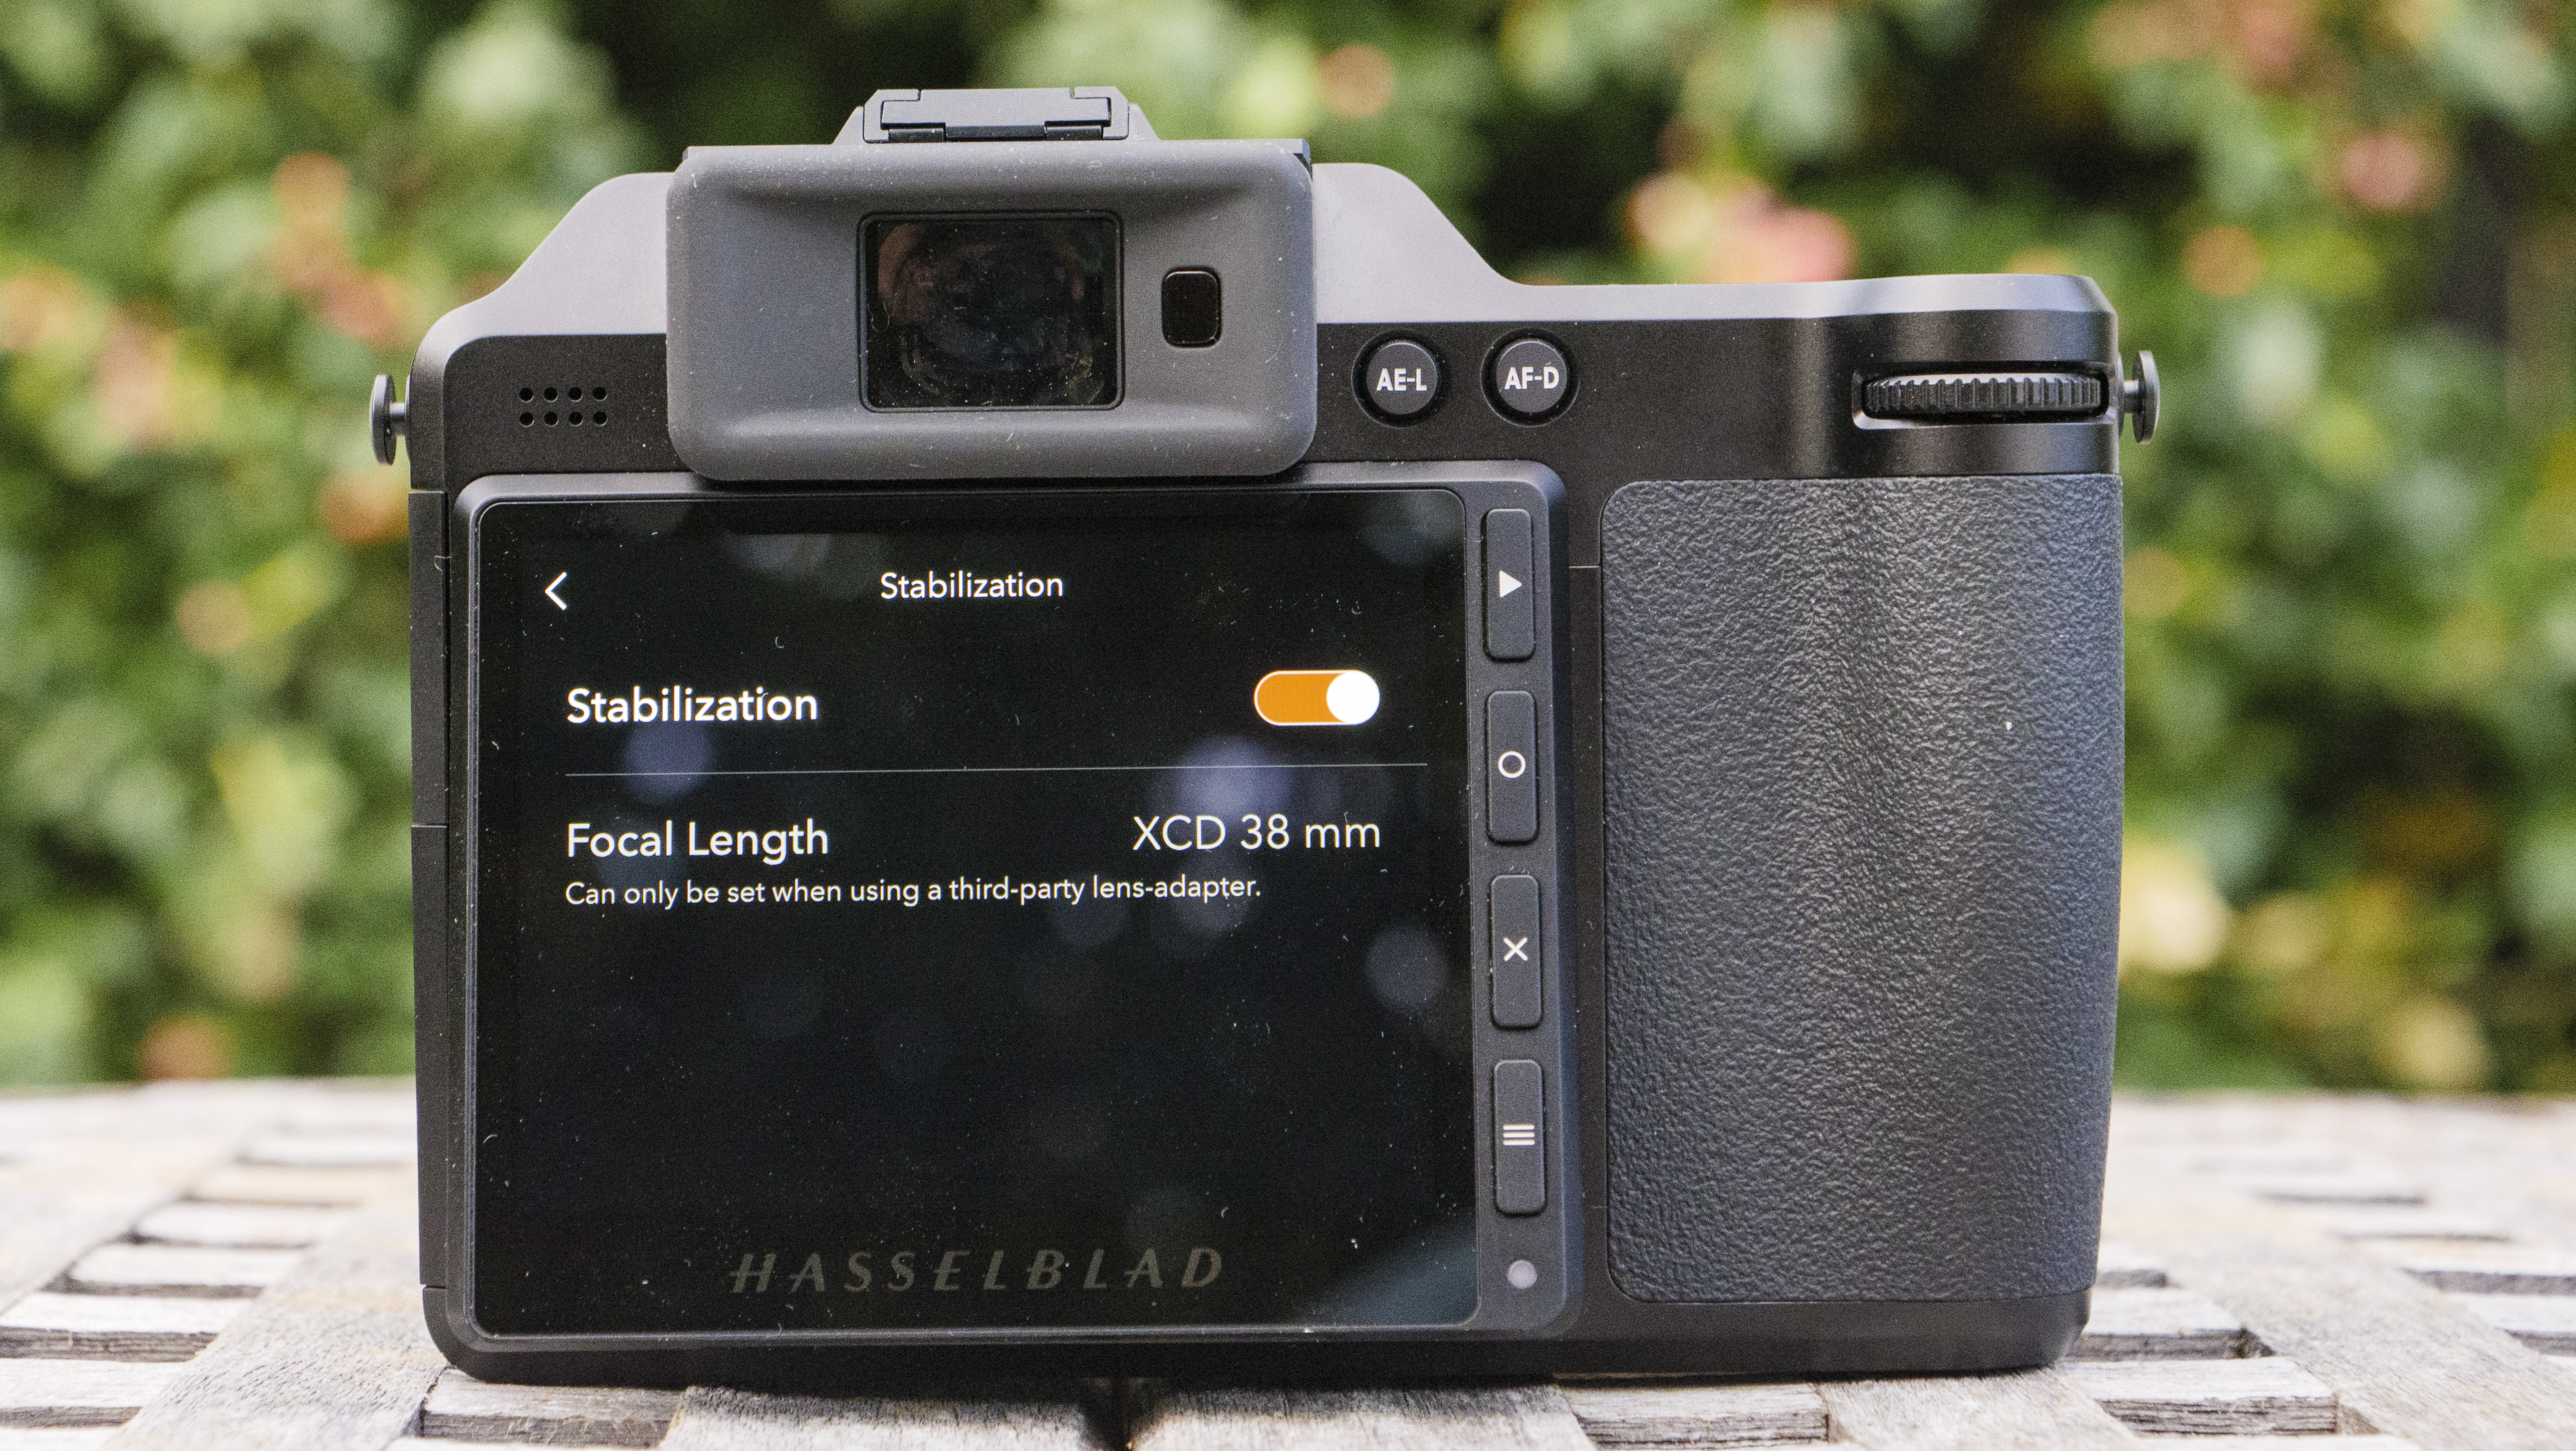 The Hasselblad X2D 100C camera screen showing image stabilisation on